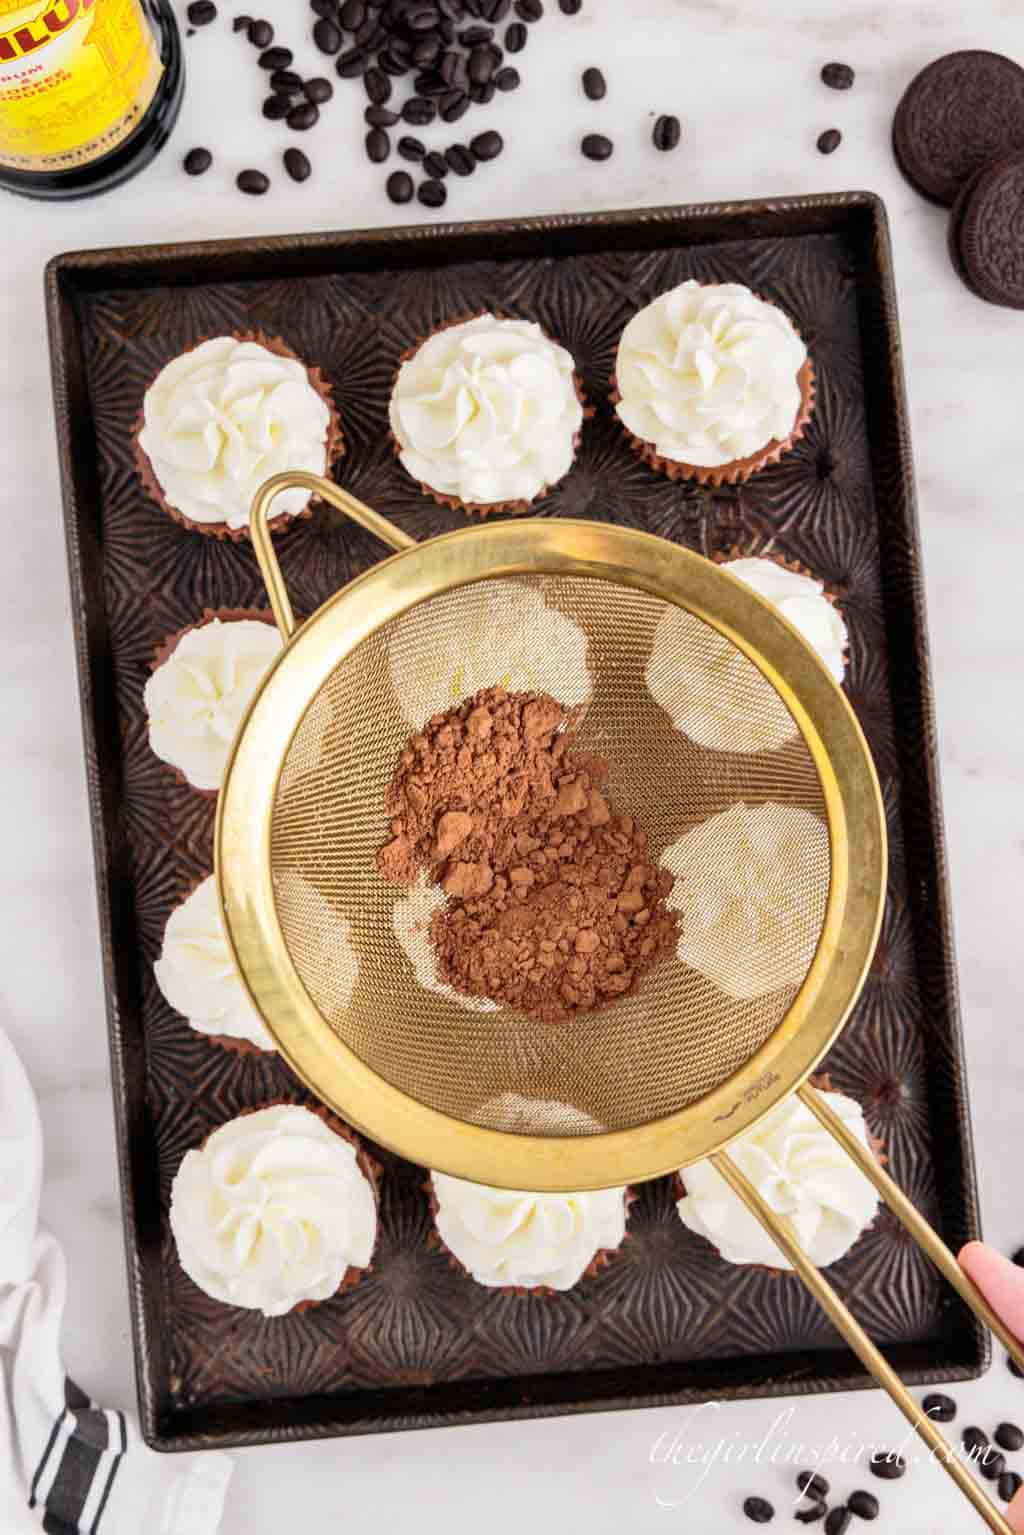 sifter with cocoa powder over cheesecake bites.